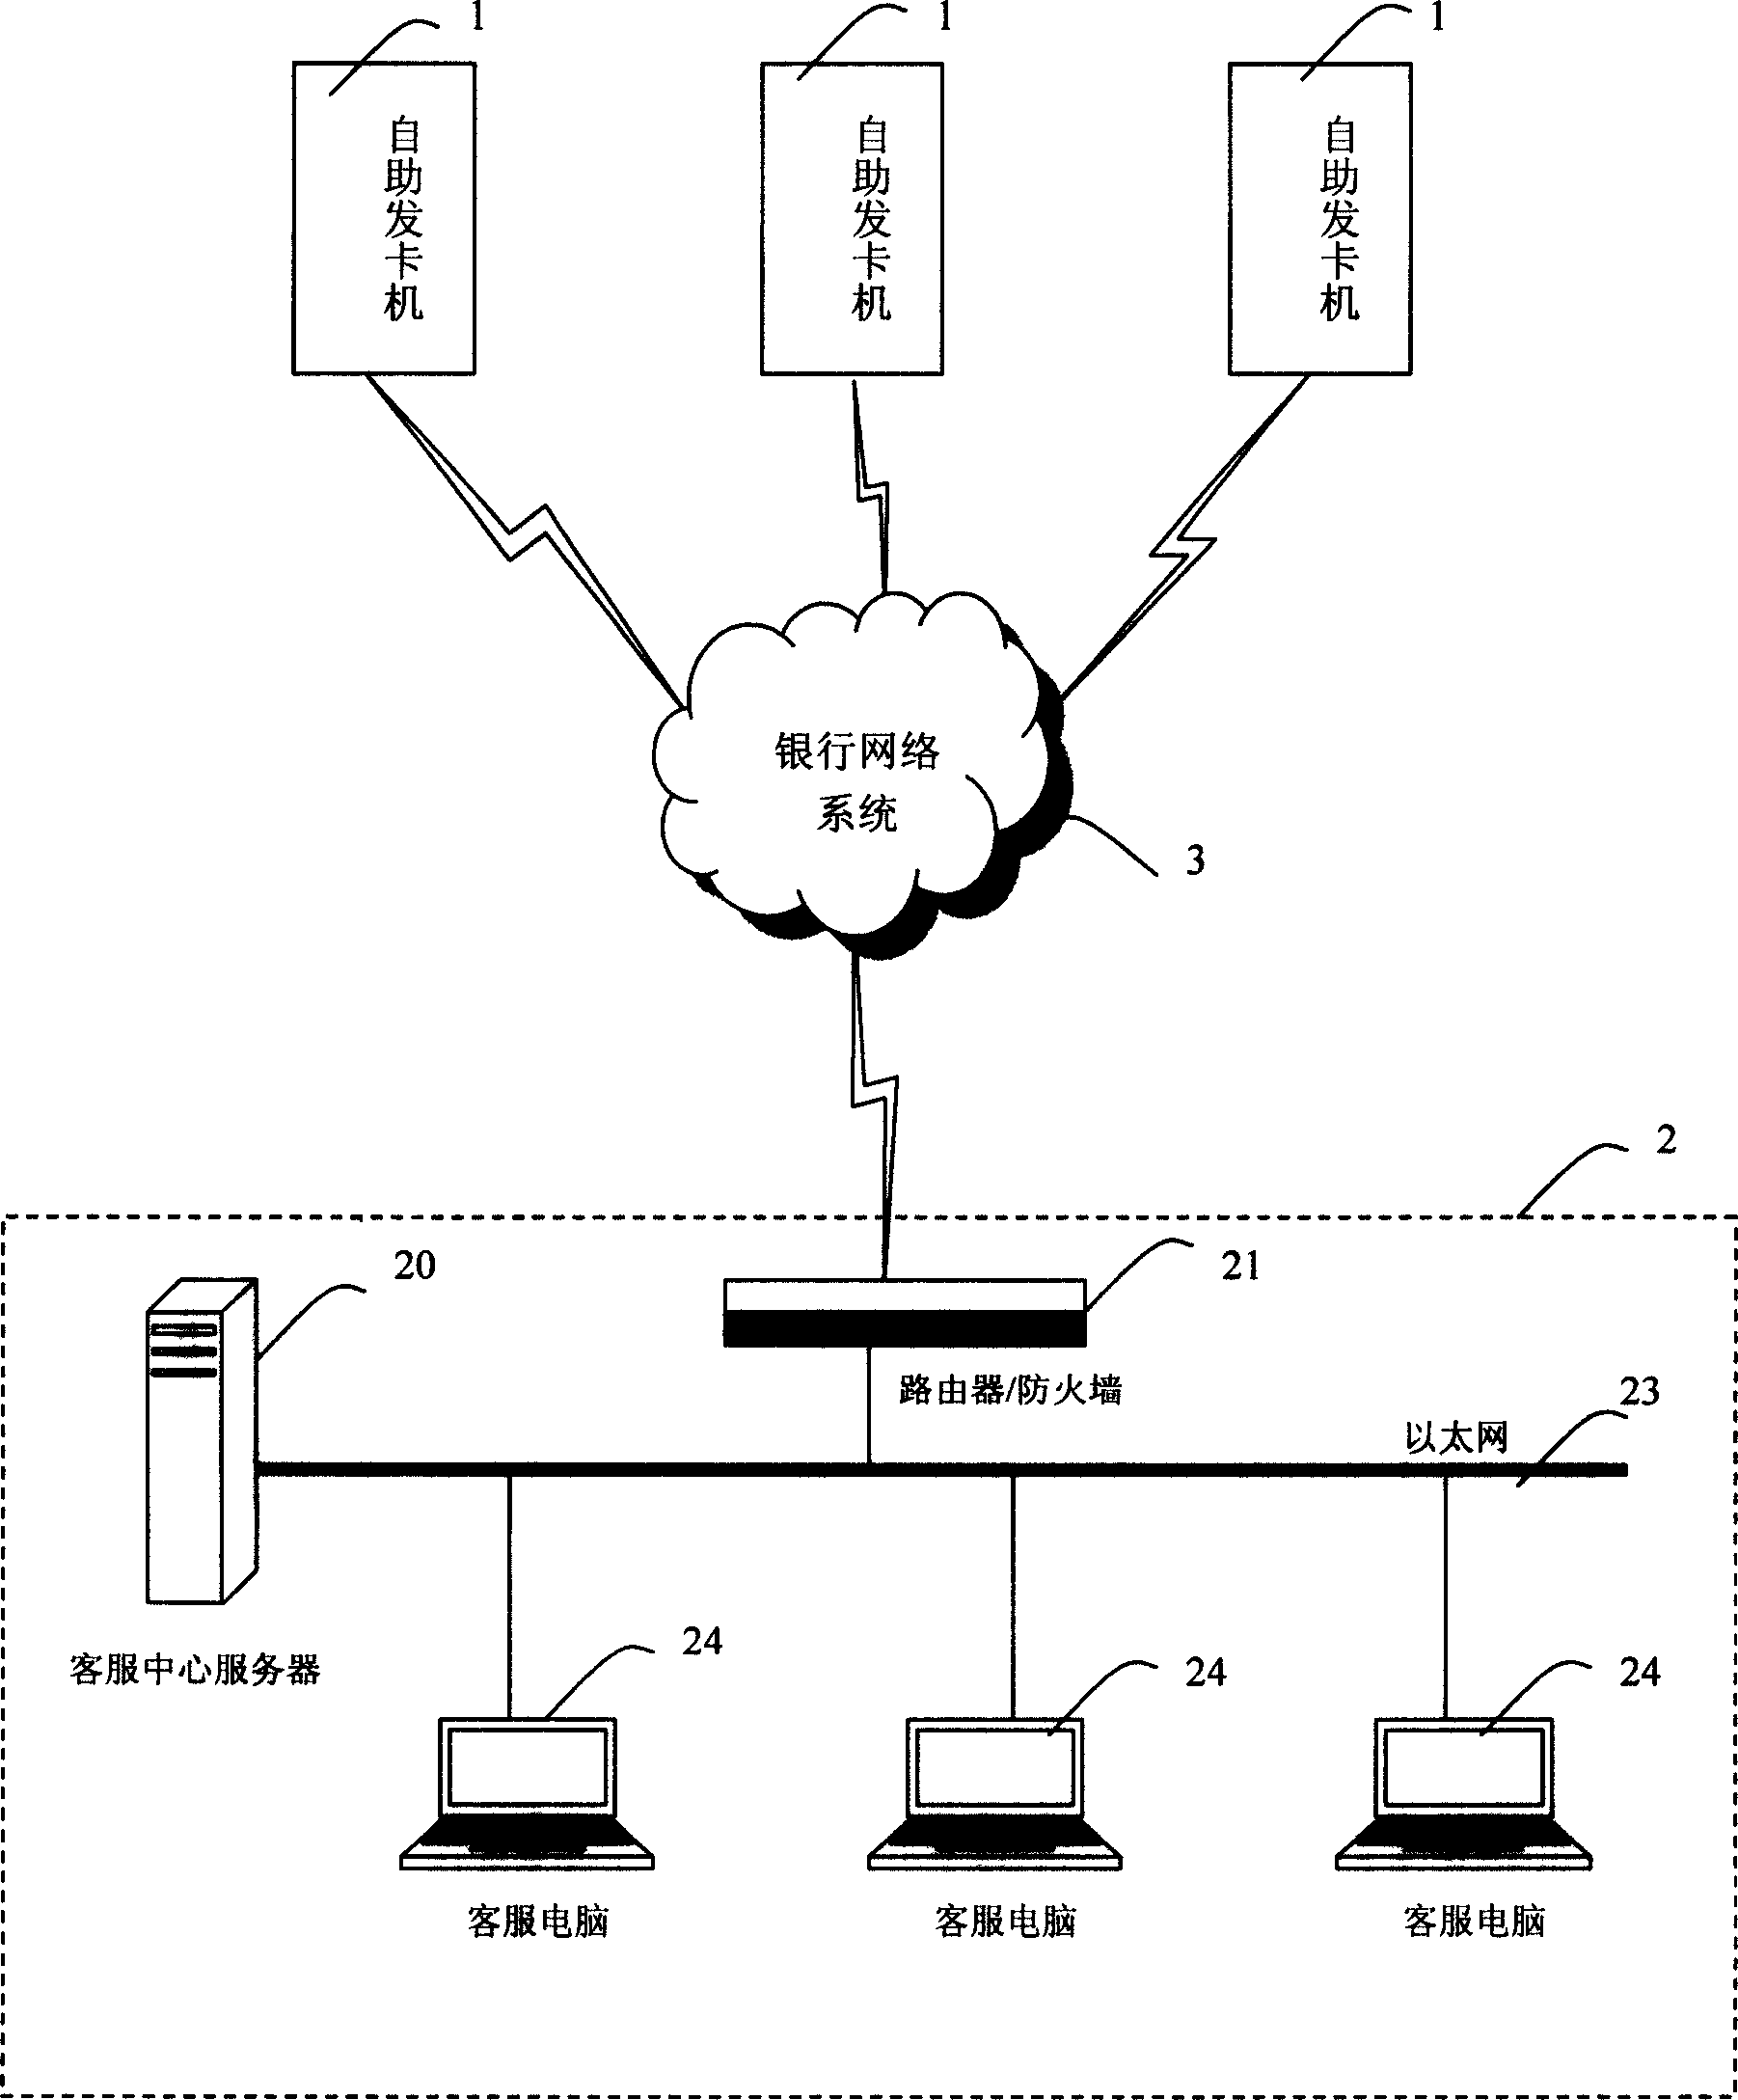 Self-service card-issueing system and method